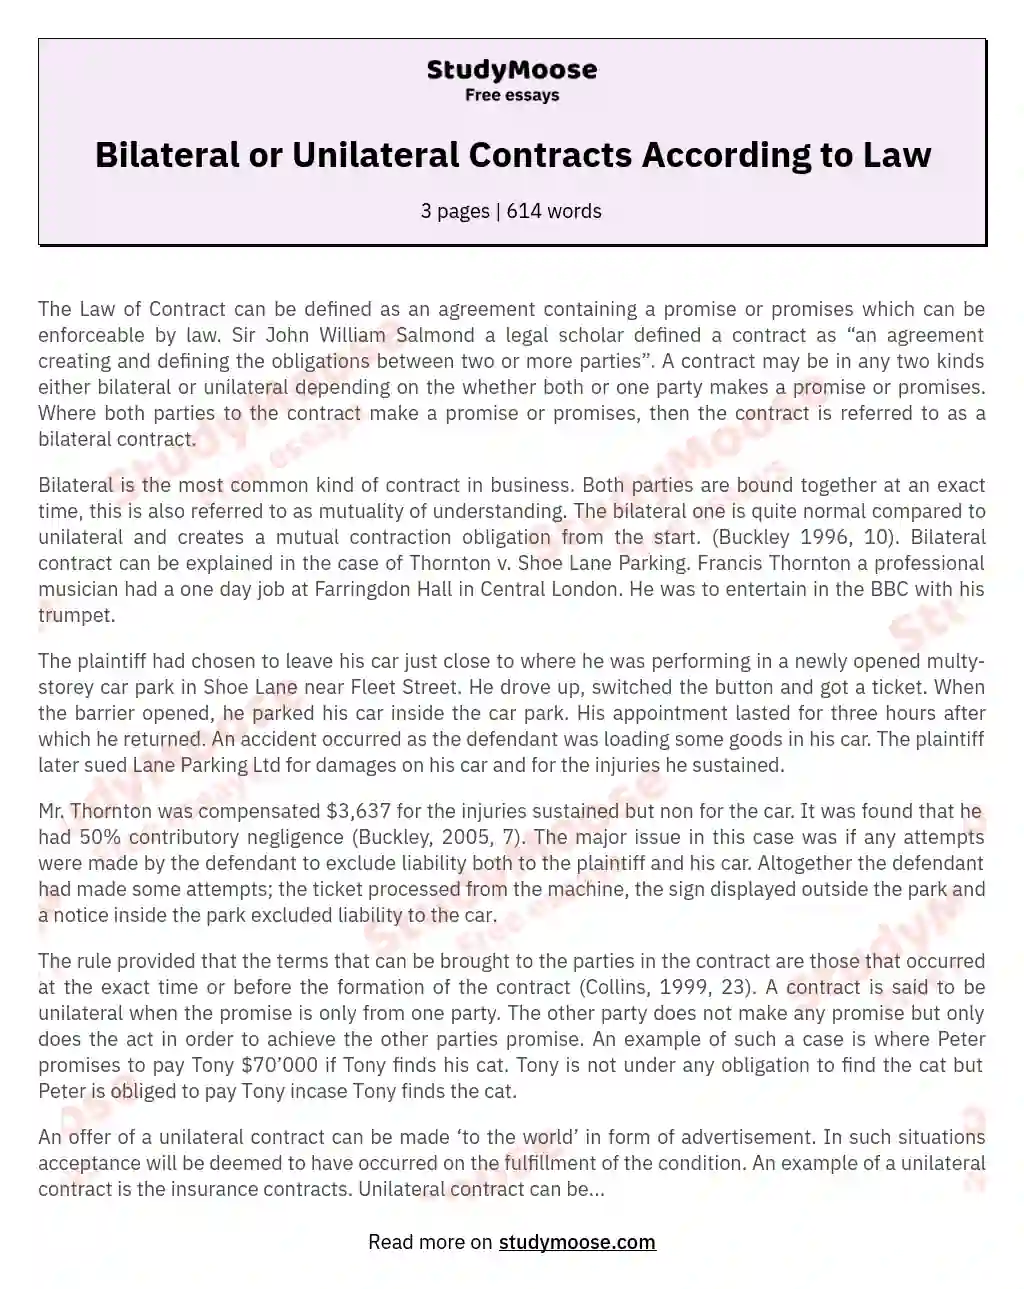 Bilateral or Unilateral Contracts According to Law essay